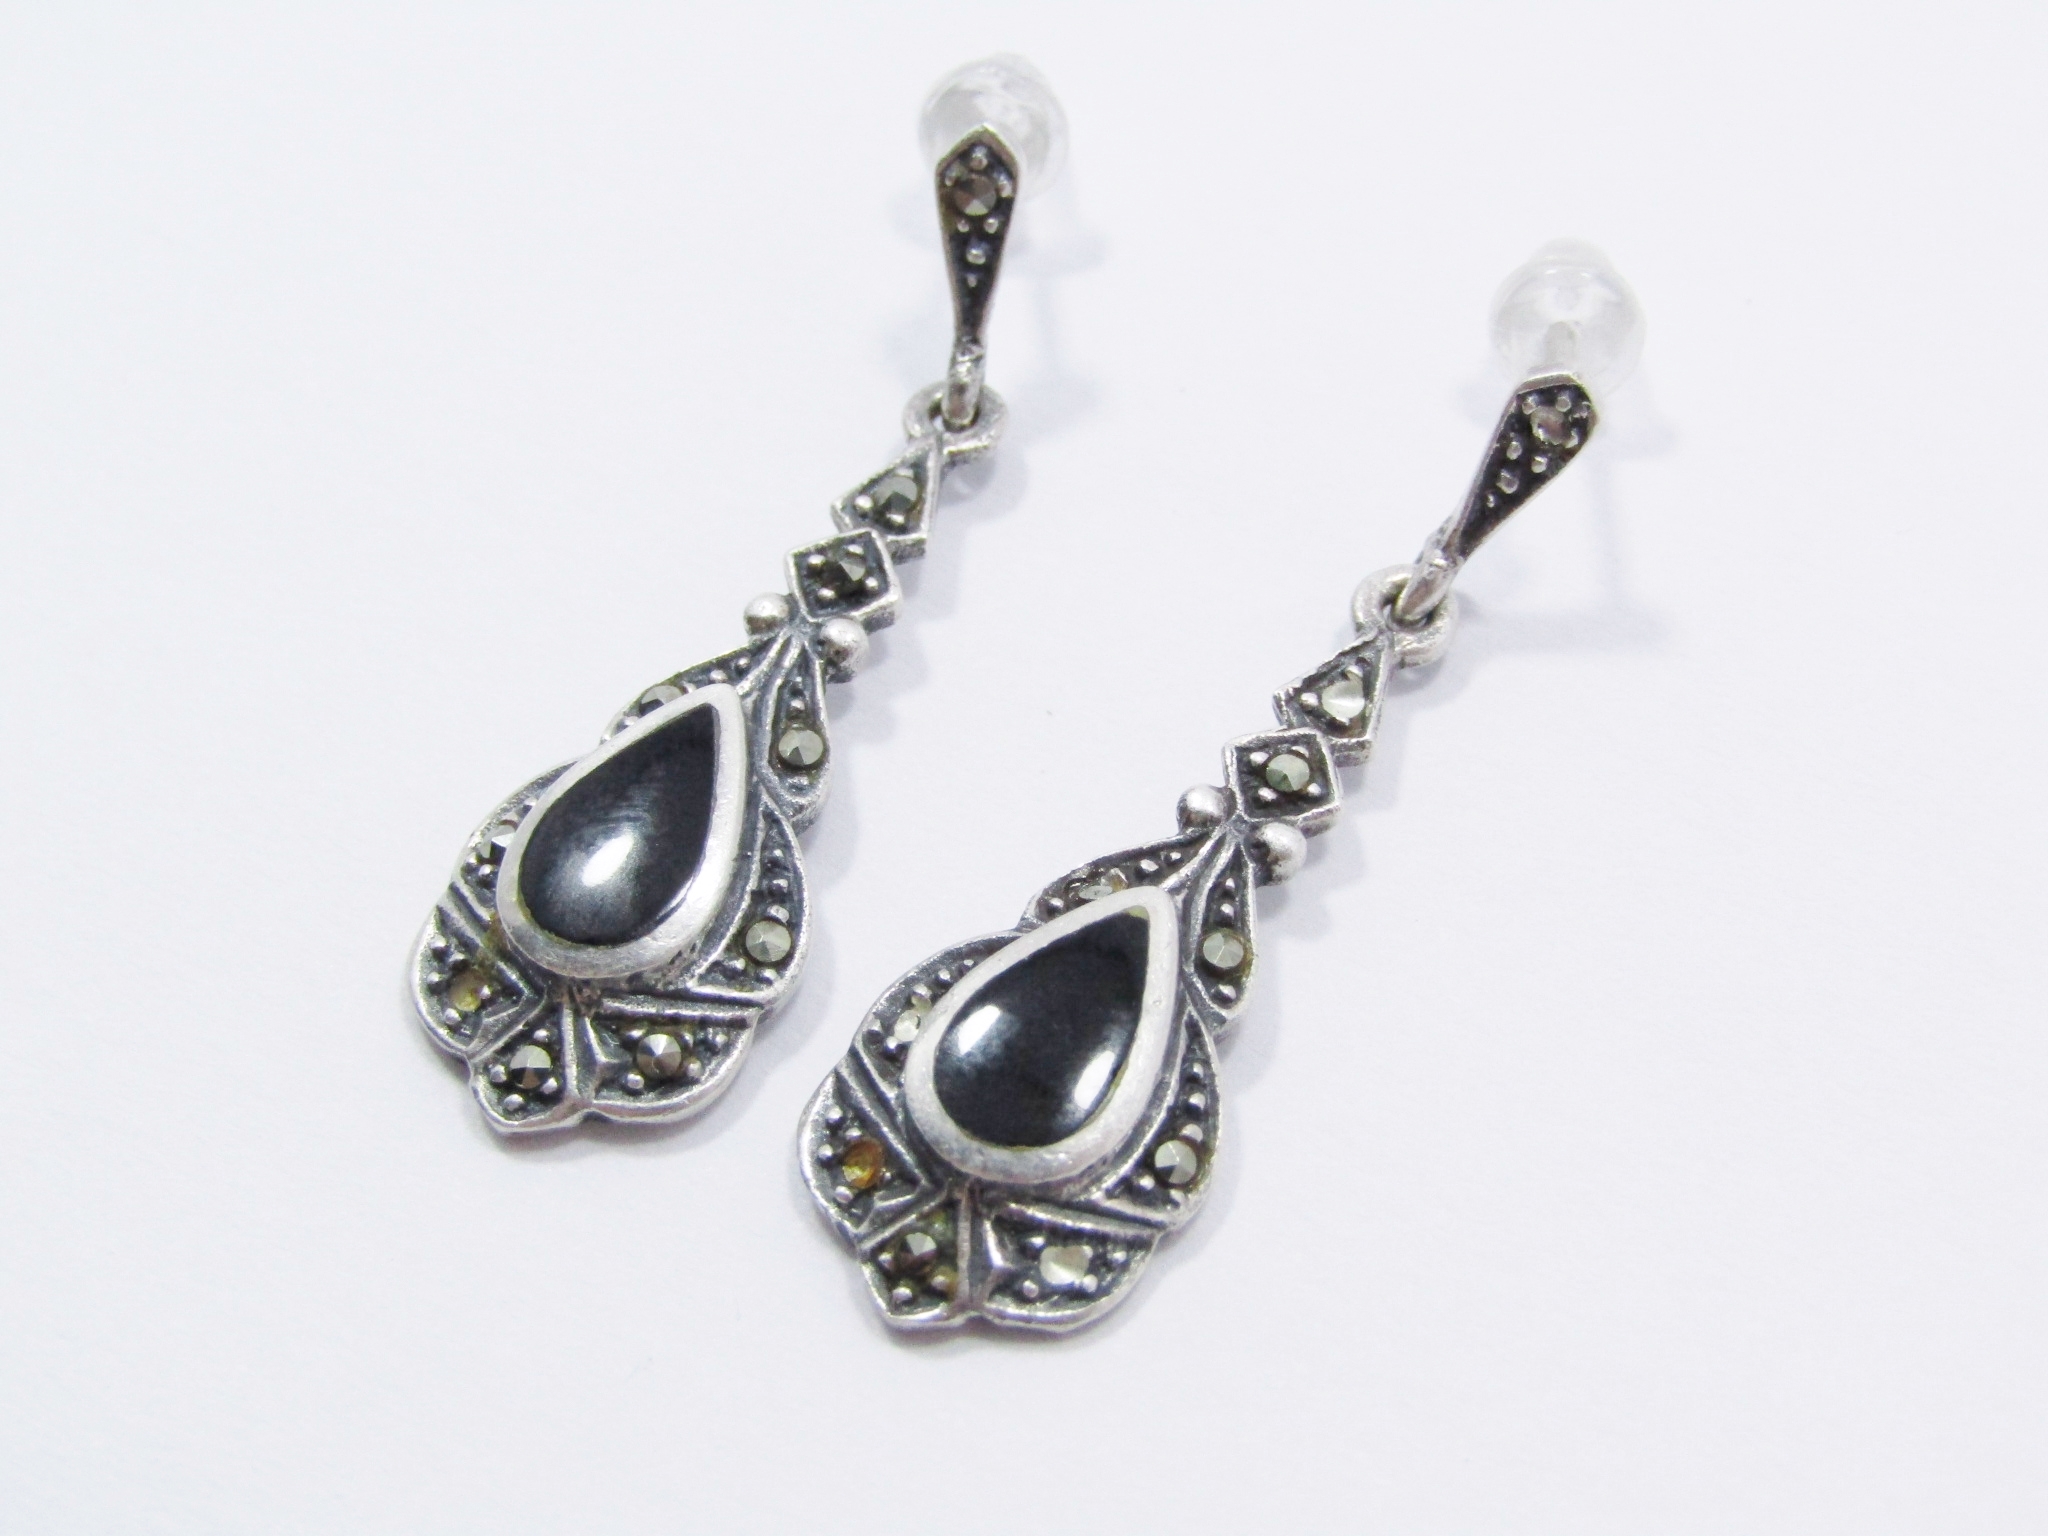 Beautiful Vintage Design Drop Earrings With Black Stone And Marcasite’s in Sterling Silver.